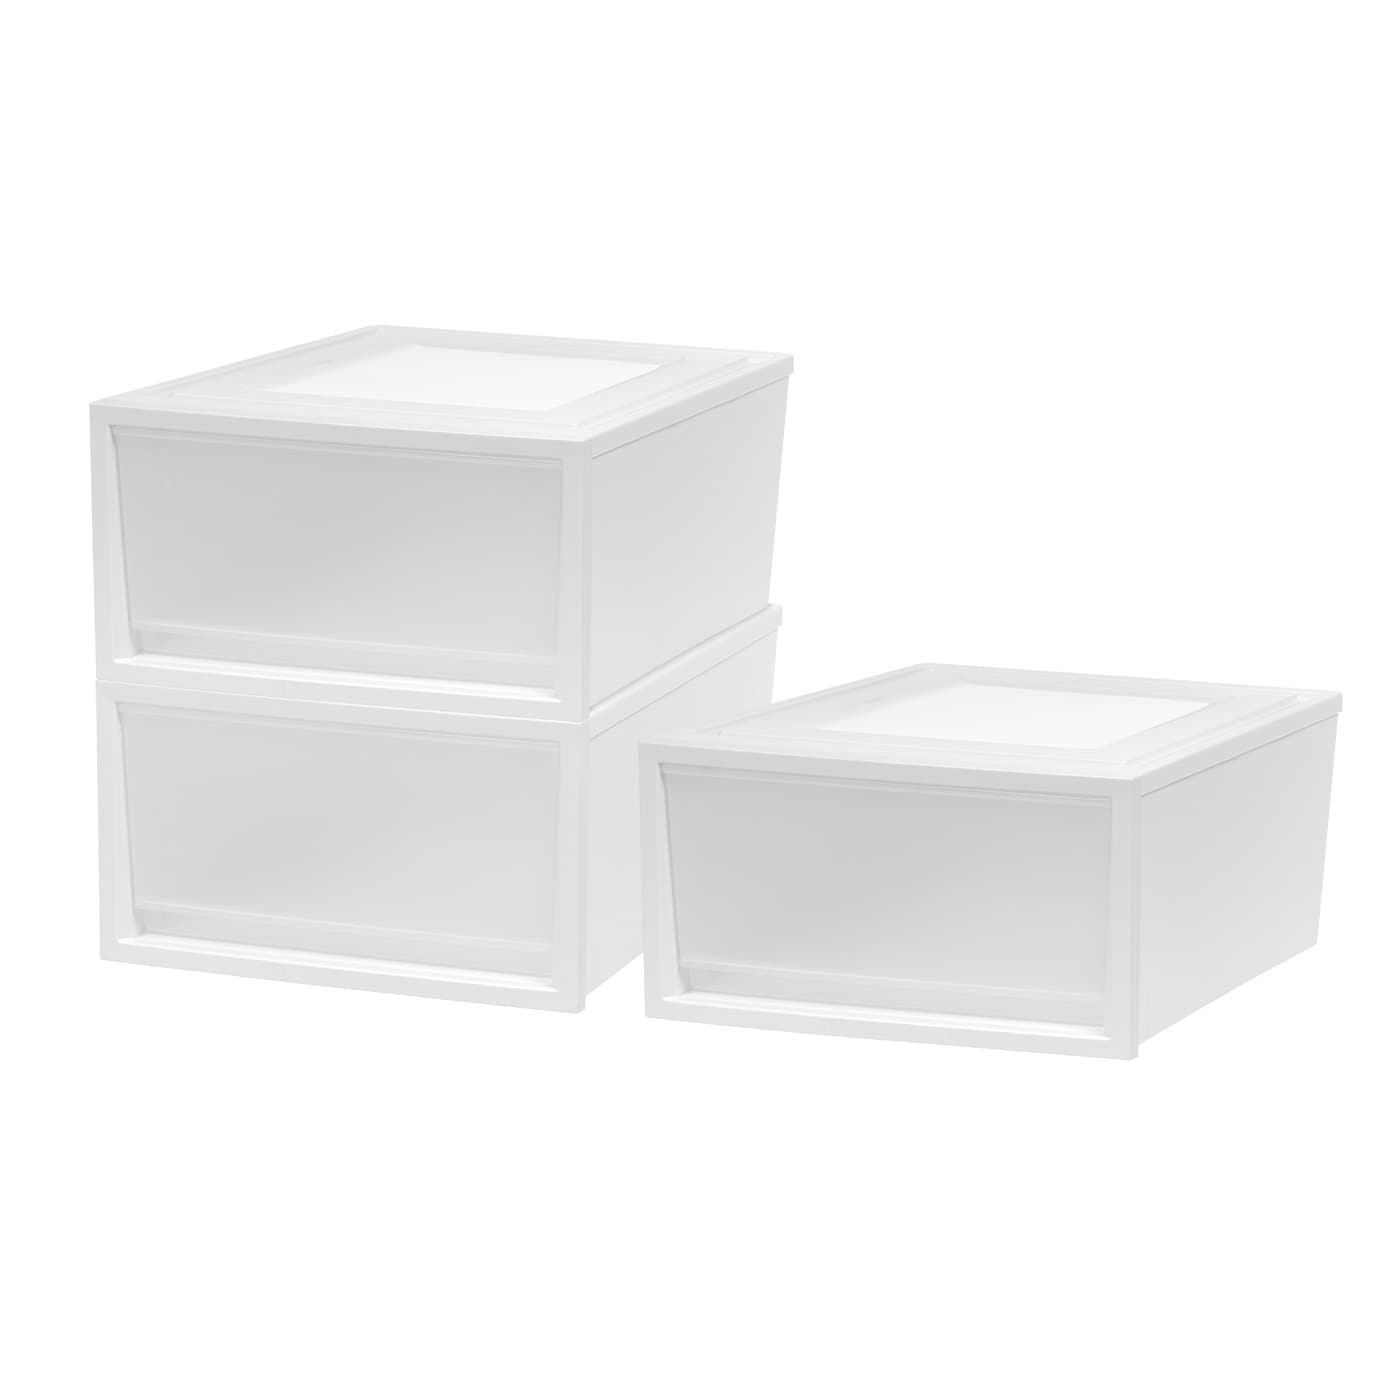 IRIS 8.63-in W x 2.38-in H x 6.5-in D Clear Plastic Stackable Bin at